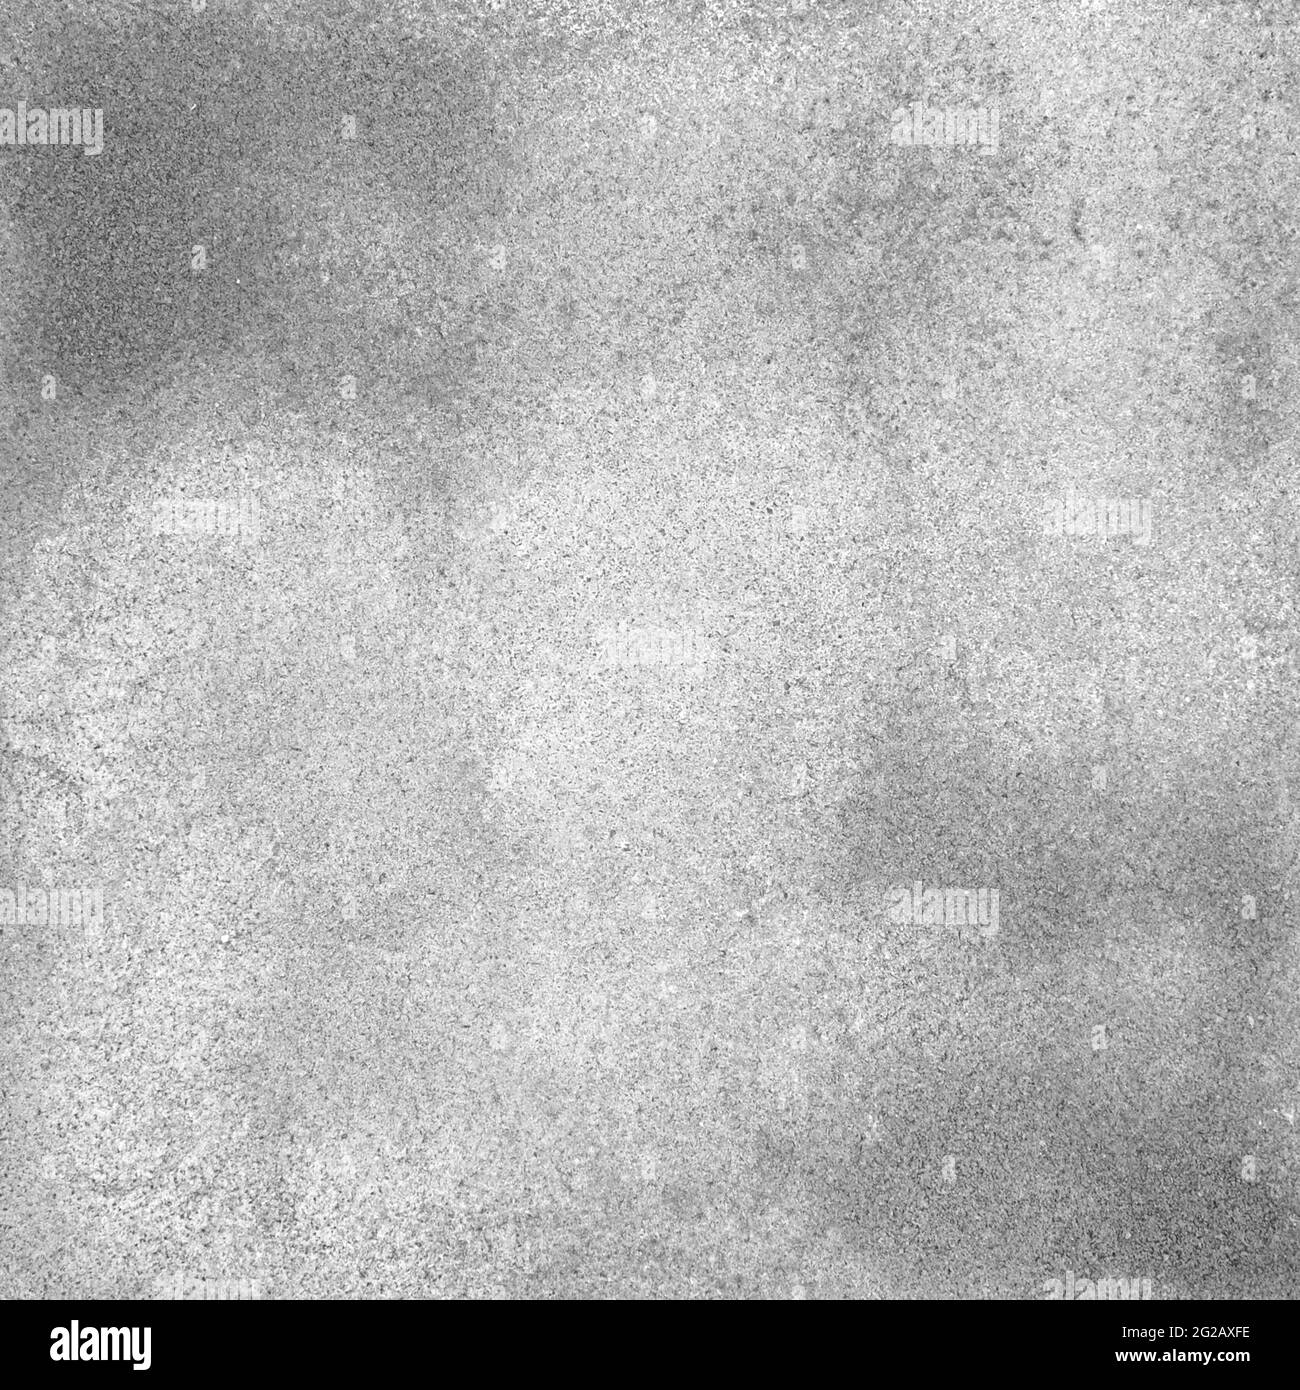 Grainy texture background grey Black and White Stock Photos & Images - Alamy